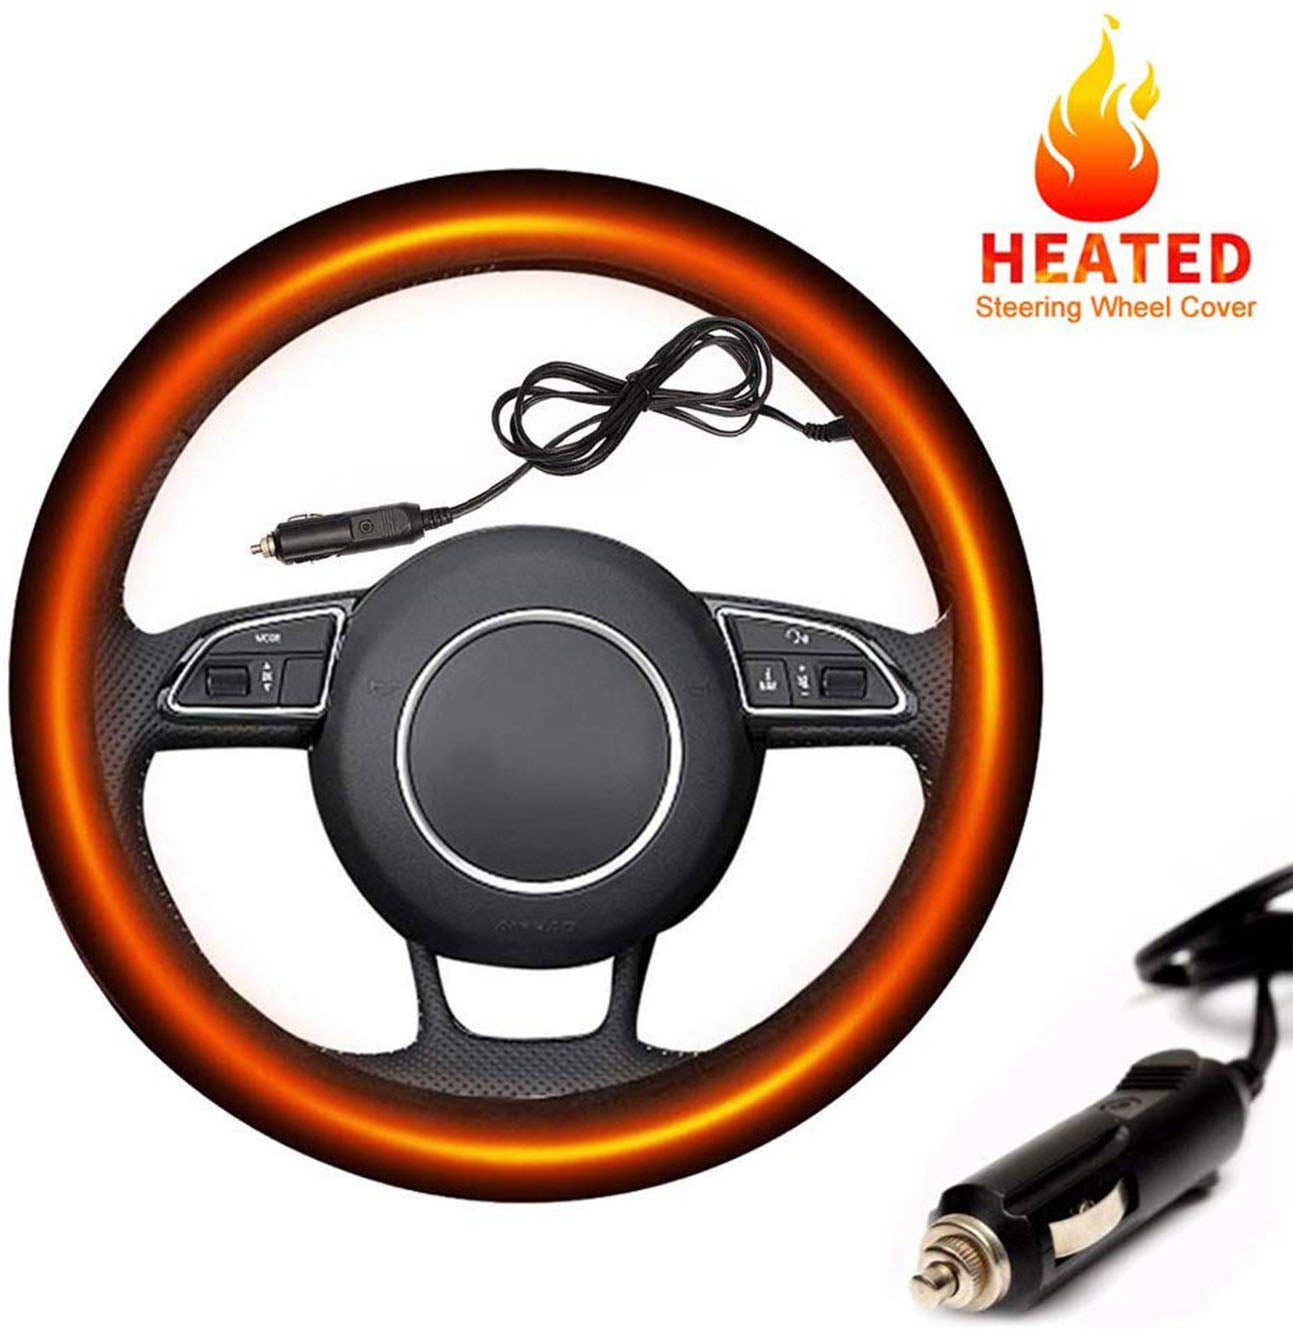 Can You Put a Steering Wheel Cover on a Heated Steering Wheel